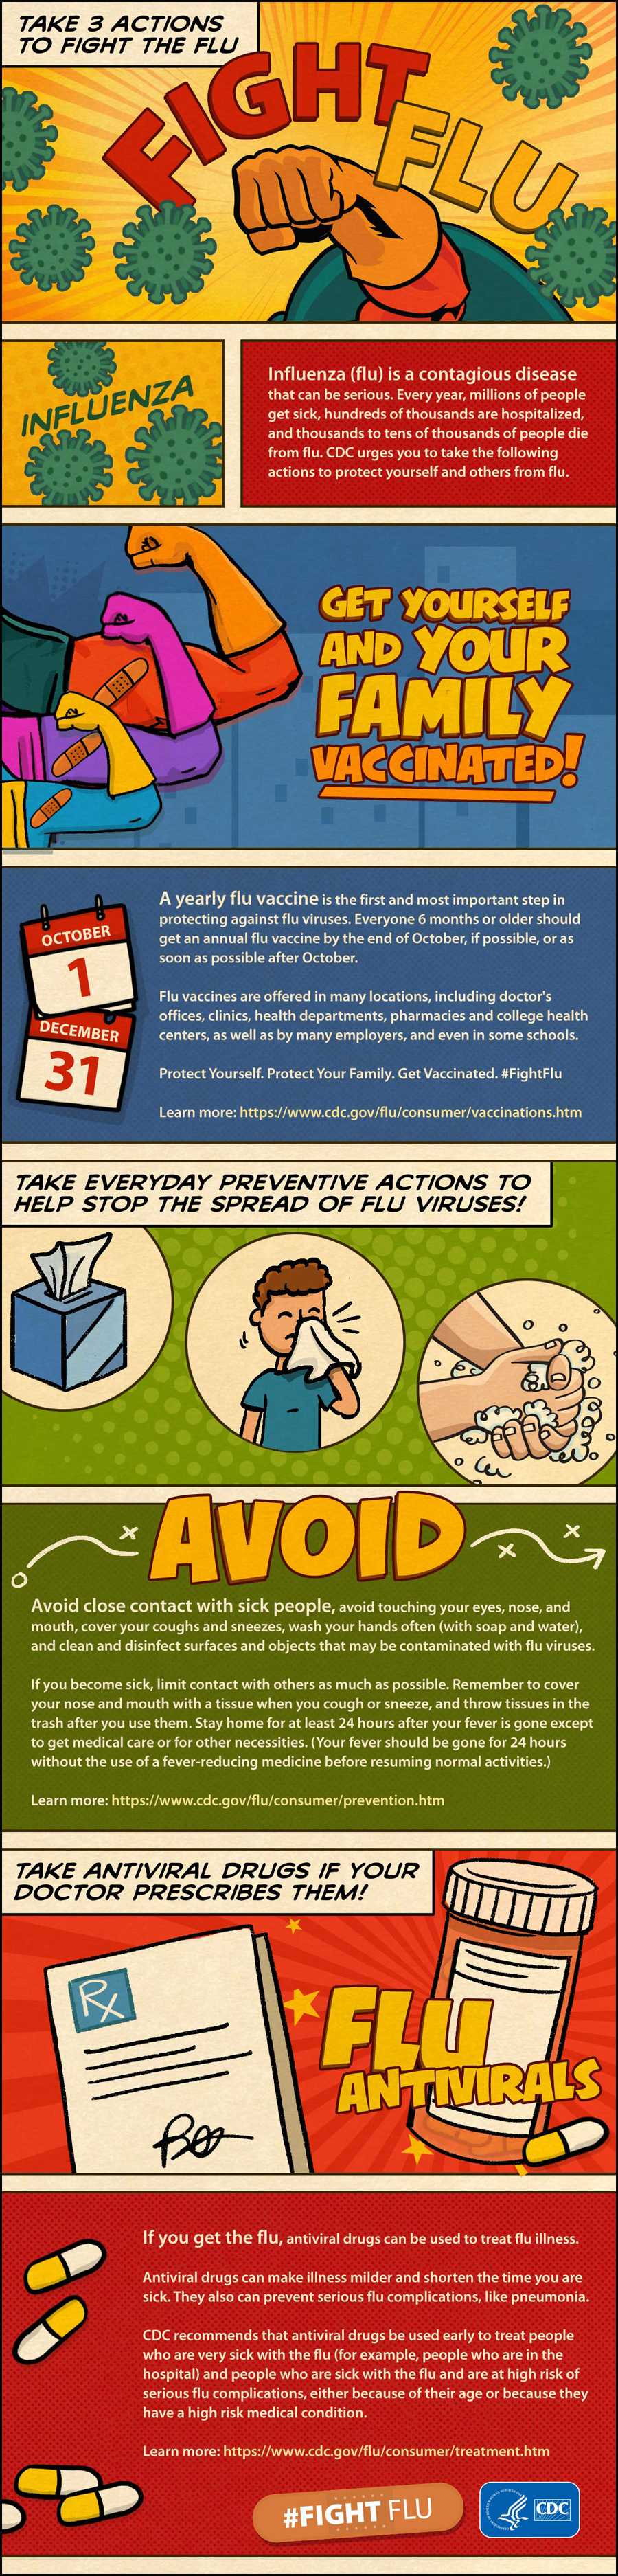 Infographic: Take 3 Actions To Fight The Flu